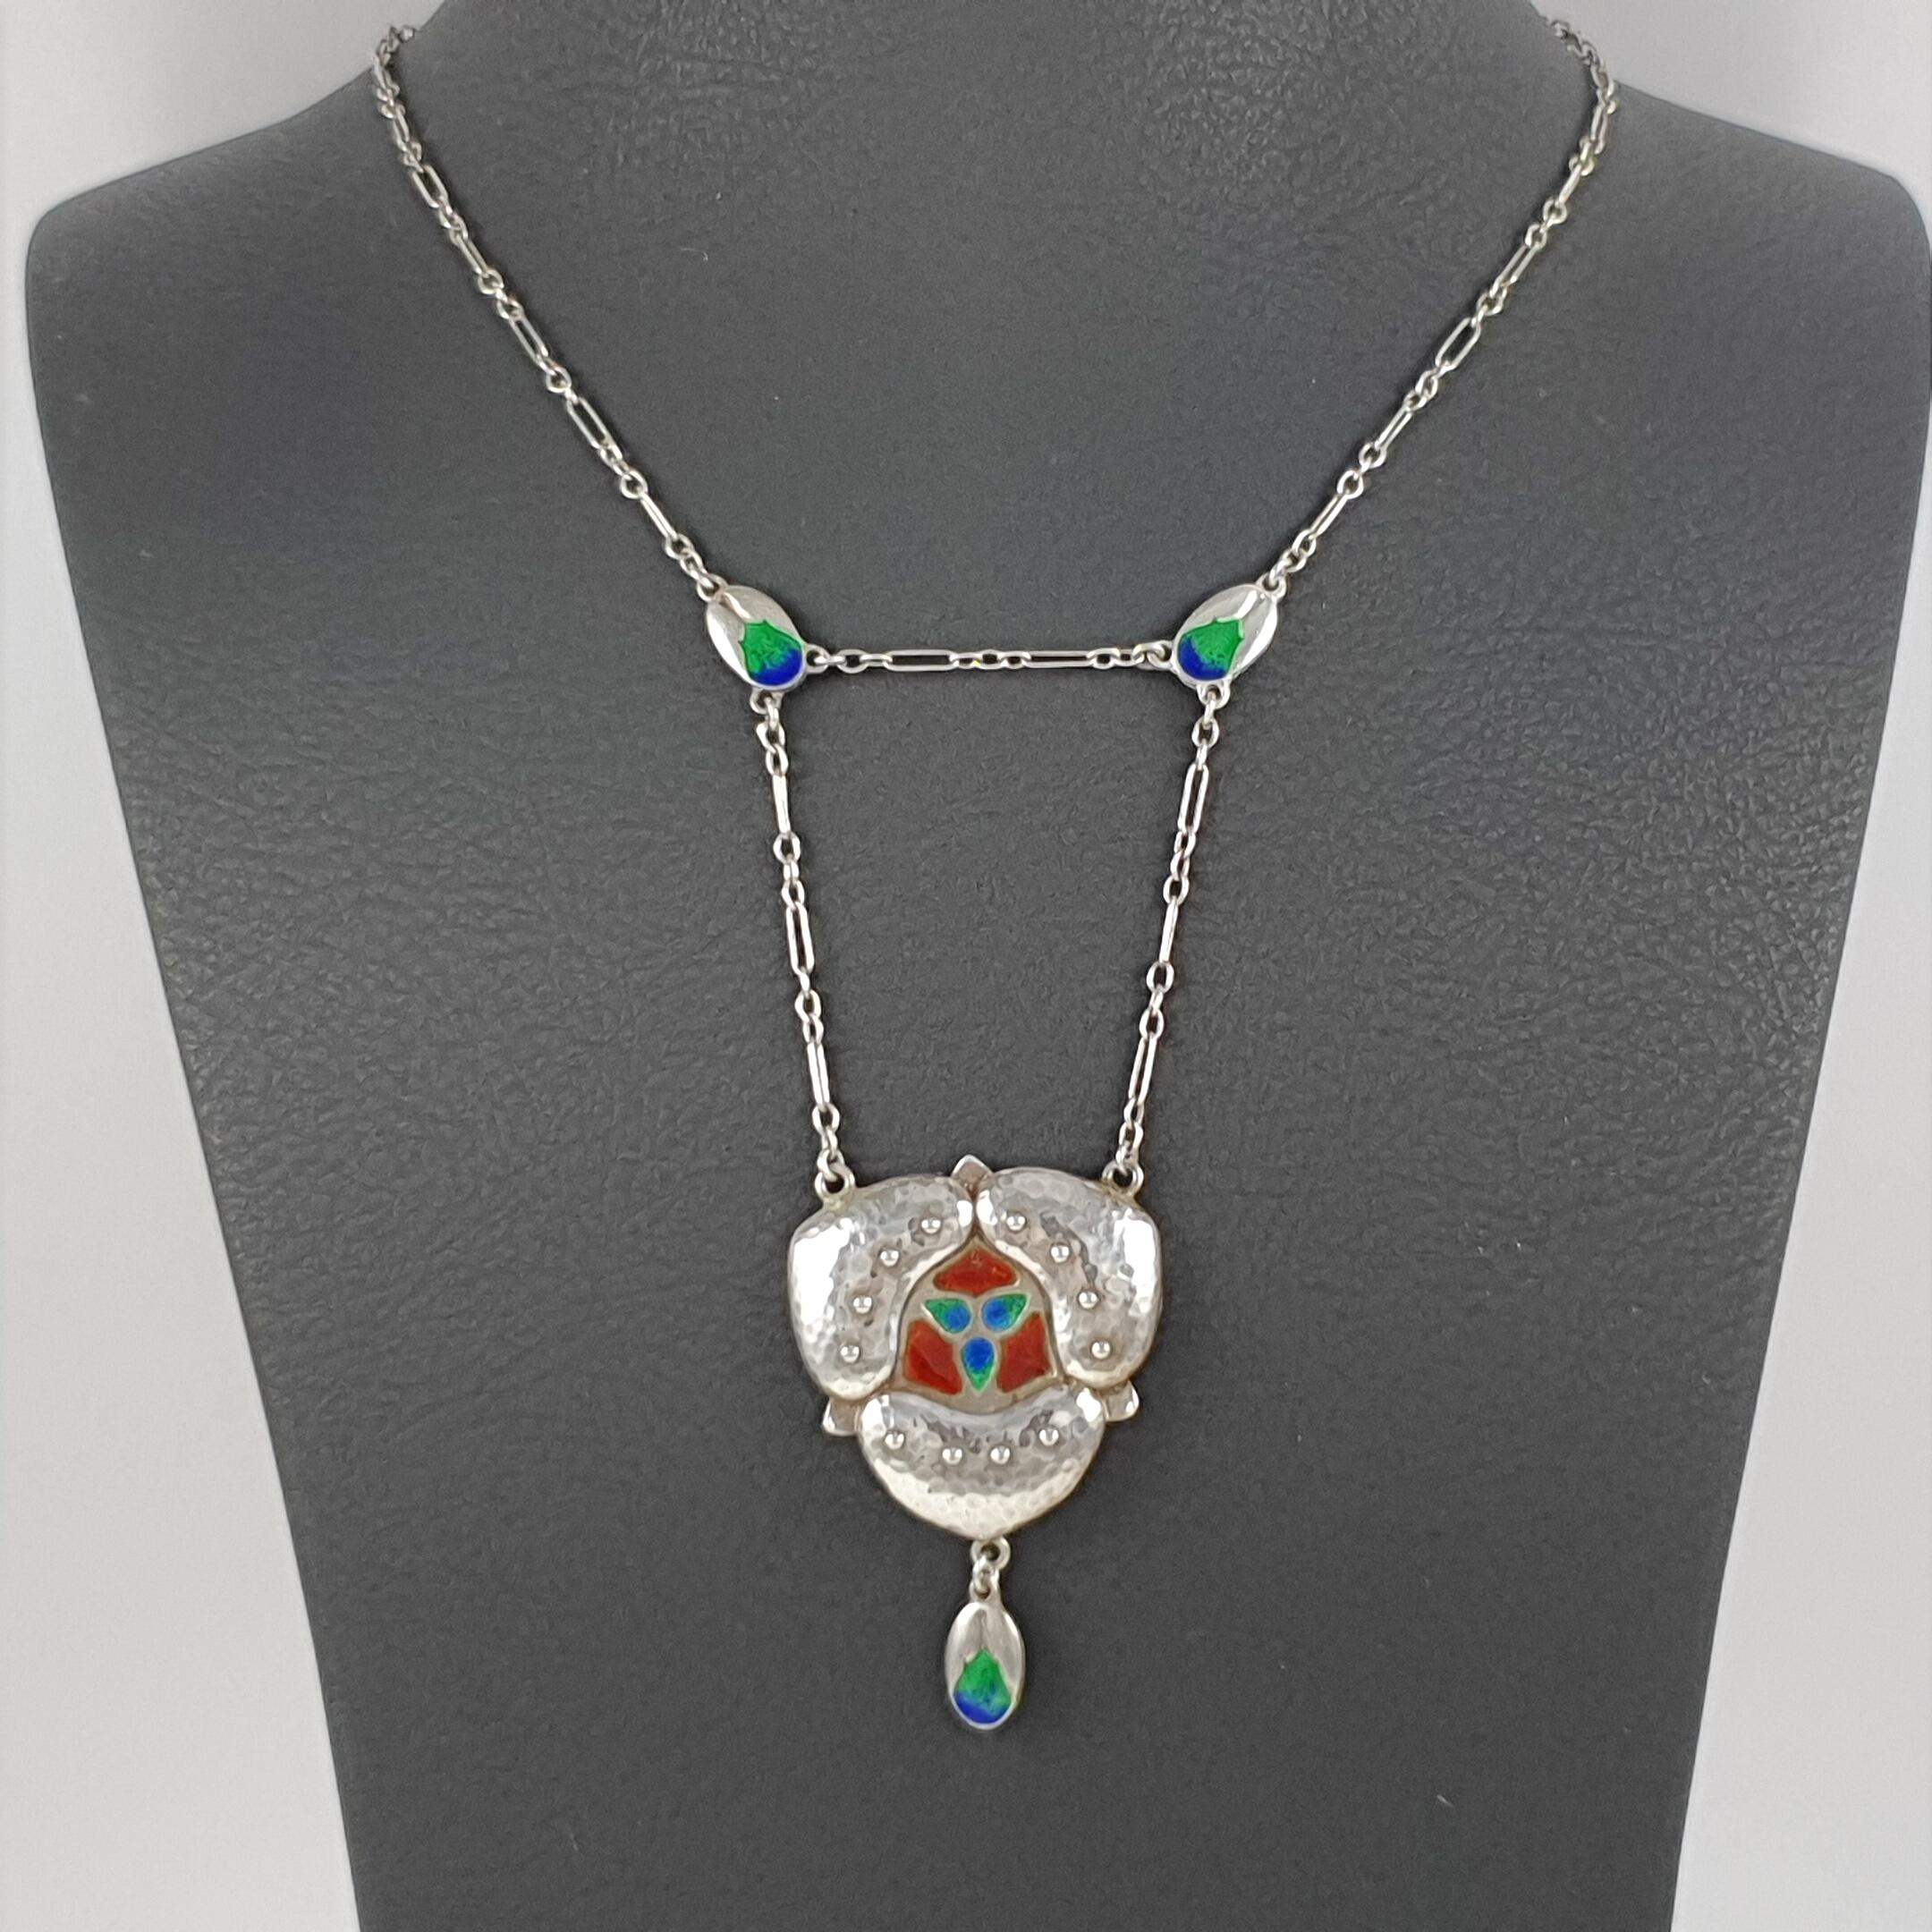 Murrle Bennett & Co. Arts & Crafts Silver and Enamel Pendant Necklace circa 1905 3